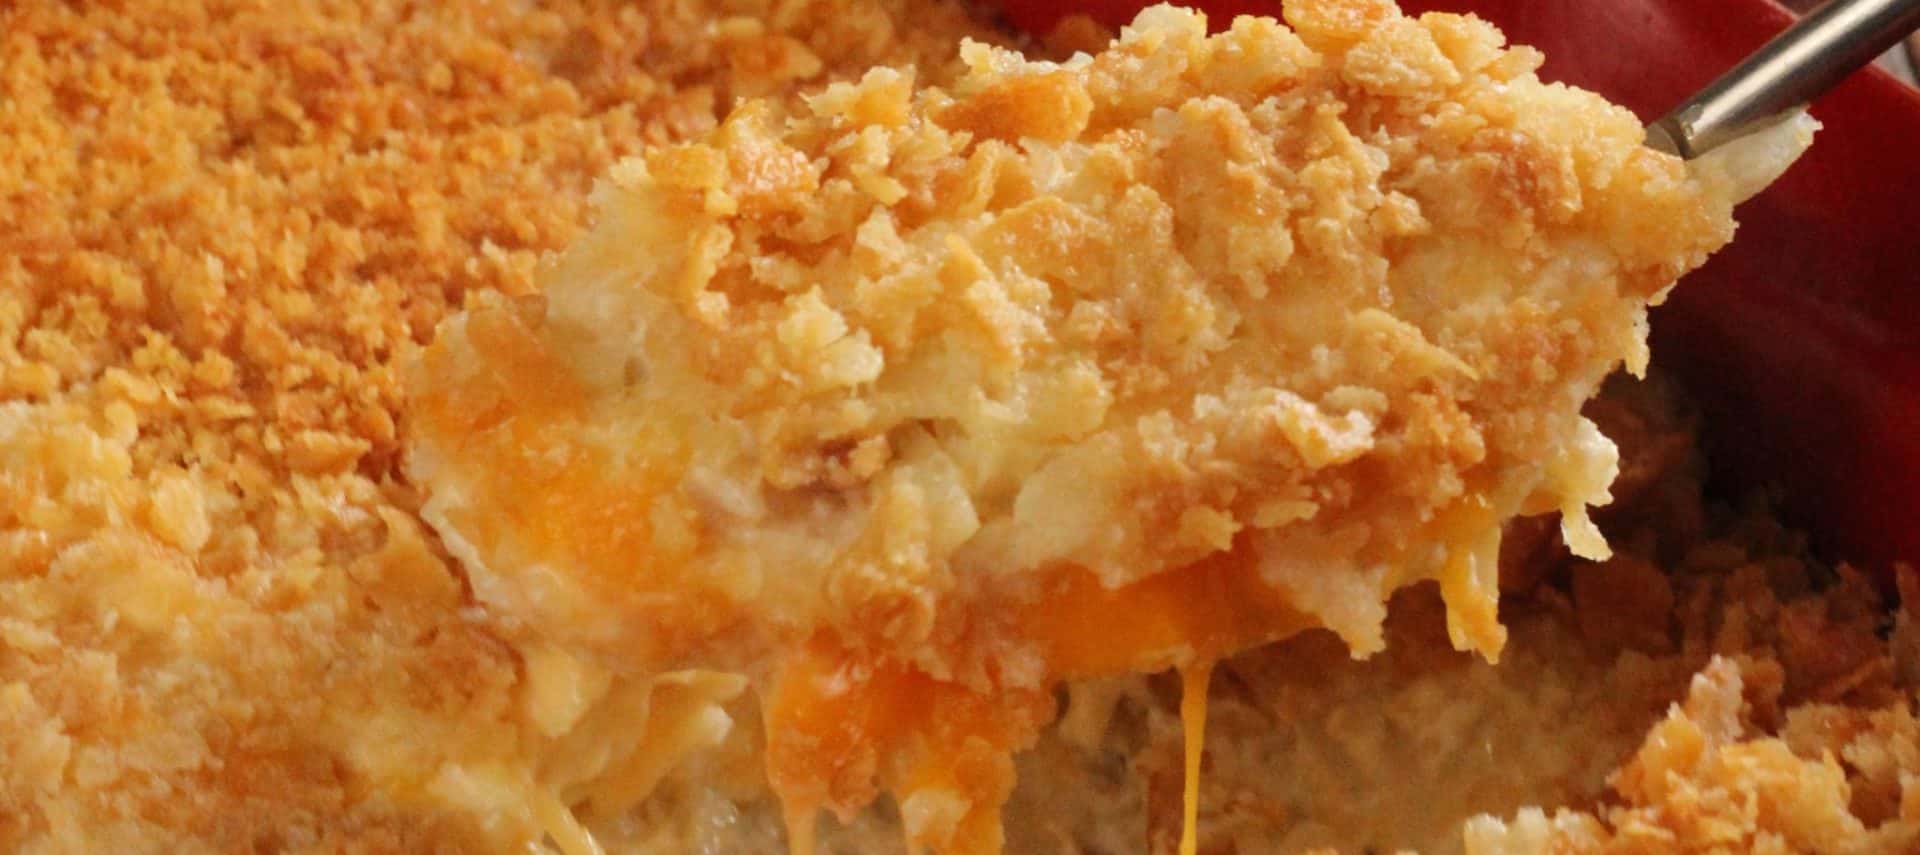 A spoonfull of cheesy hashbrown casserole